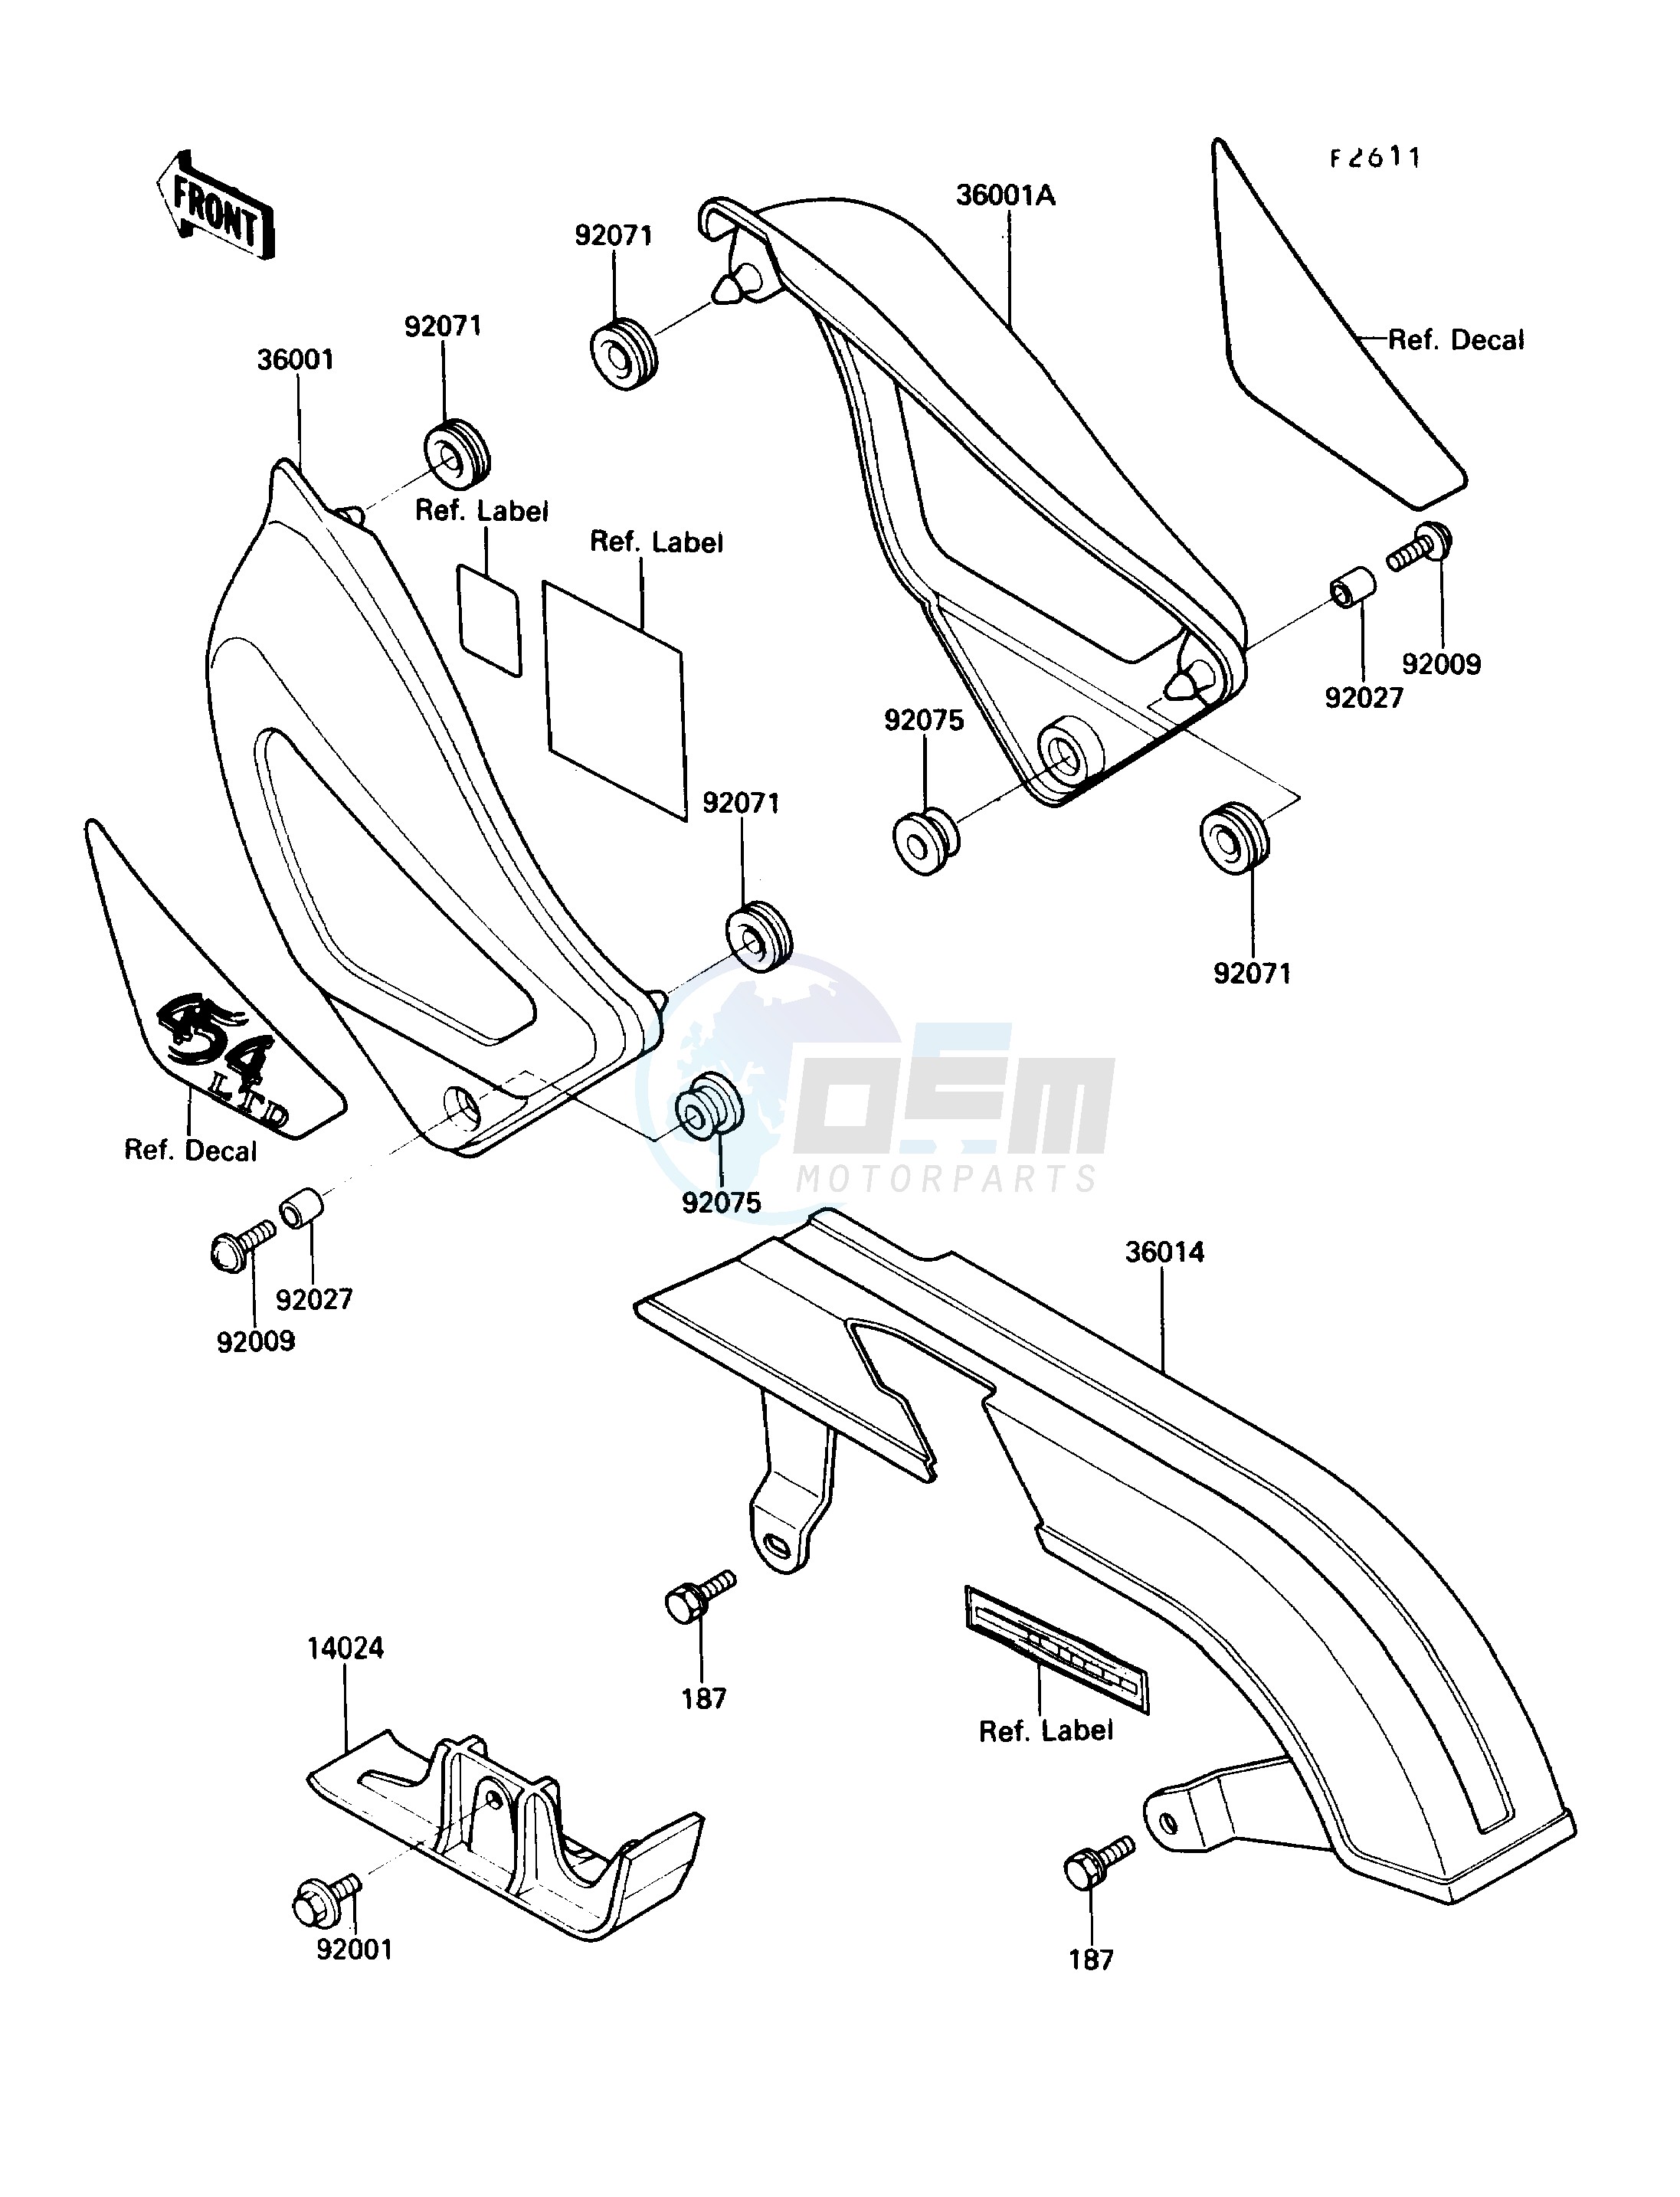 SIDE COVERS_CHAIN COVER blueprint